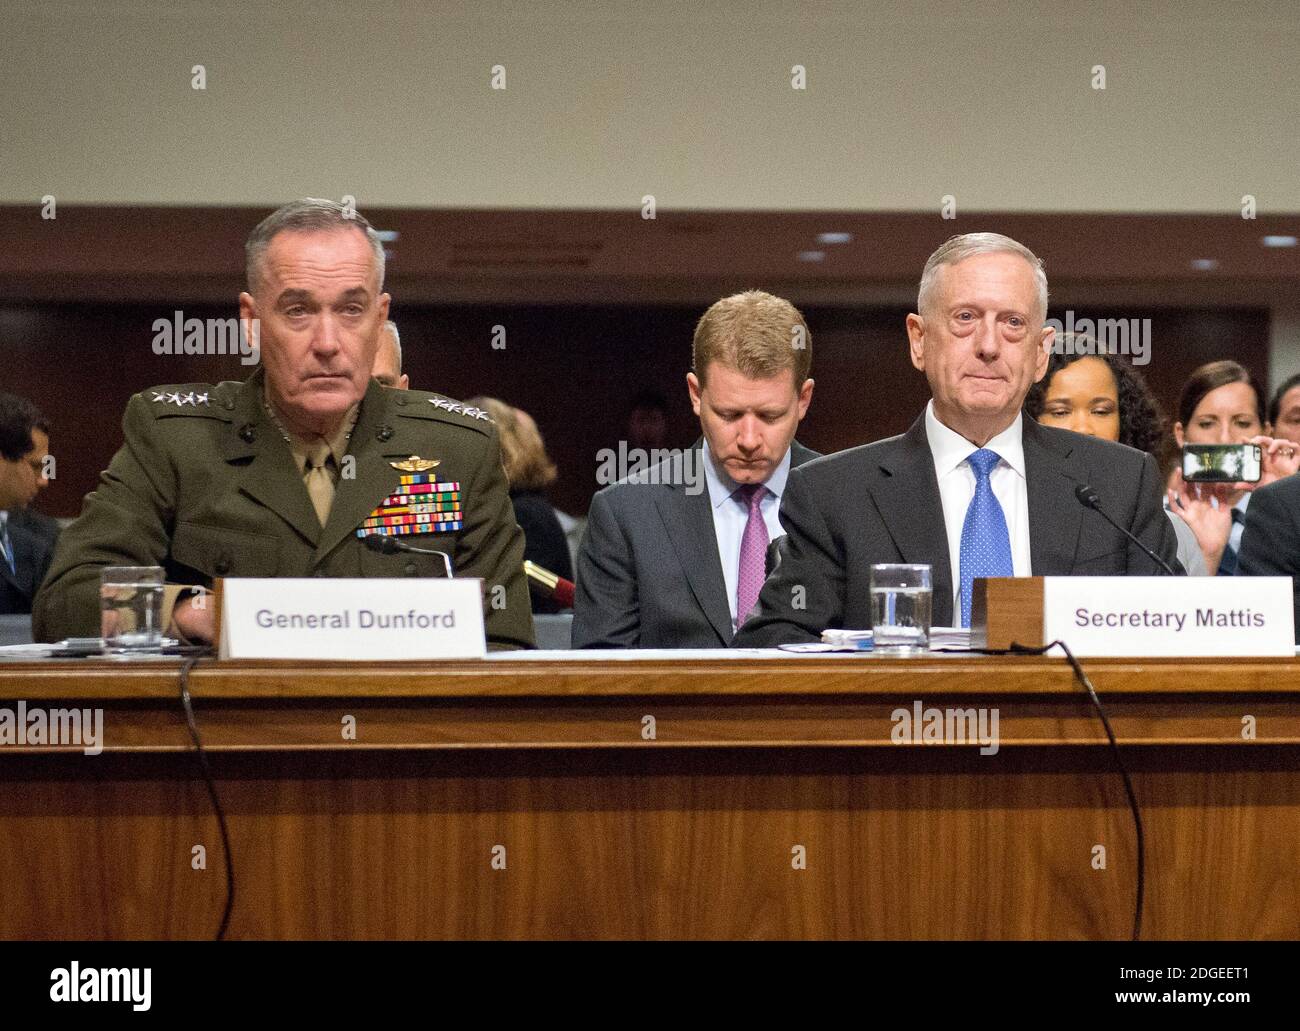 United States Secretary of Defense James N. Mattis, right, and General Joseph F. Dunford, Jr., US Marine Corps, Chairman of the Joint Chiefs of Staff, left, give testimony before the US Senate Committee on Armed Services on 'the Department of Defense budget posture in review of the Defense Authorization Request for Fiscal Year 2018 and the Future Years Defense Program' on Capitol Hill in Washington, DC on Tuesday, June 13, 2017.Photo by Ron Sachs / CNP/ABACAPRESS.COM Stock Photo